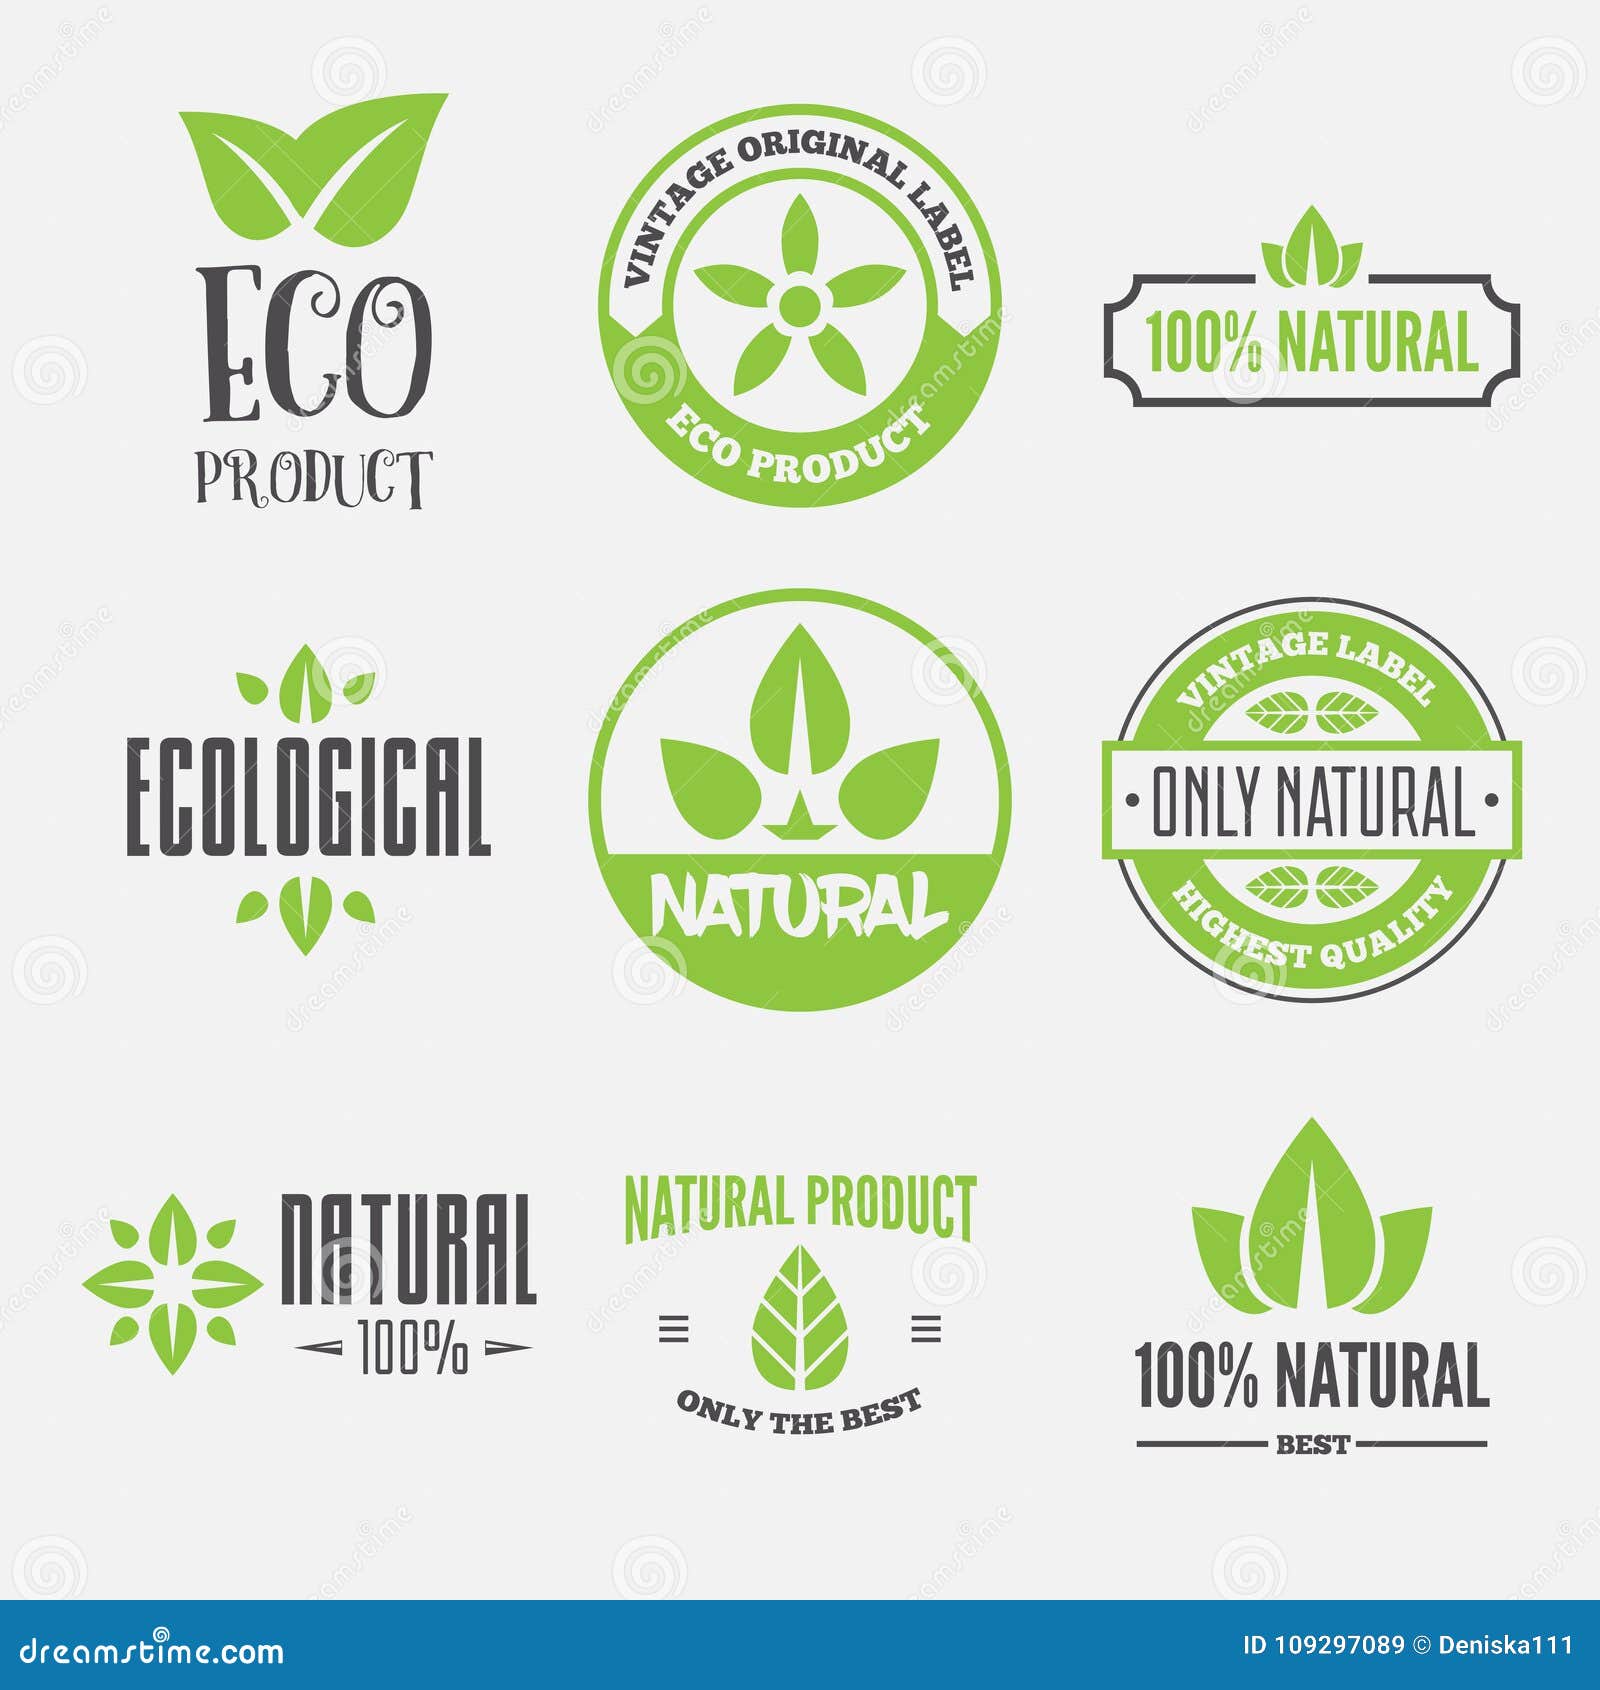  health and beauty care logos or labels. tags and s set for organic cosmetics, natural products.